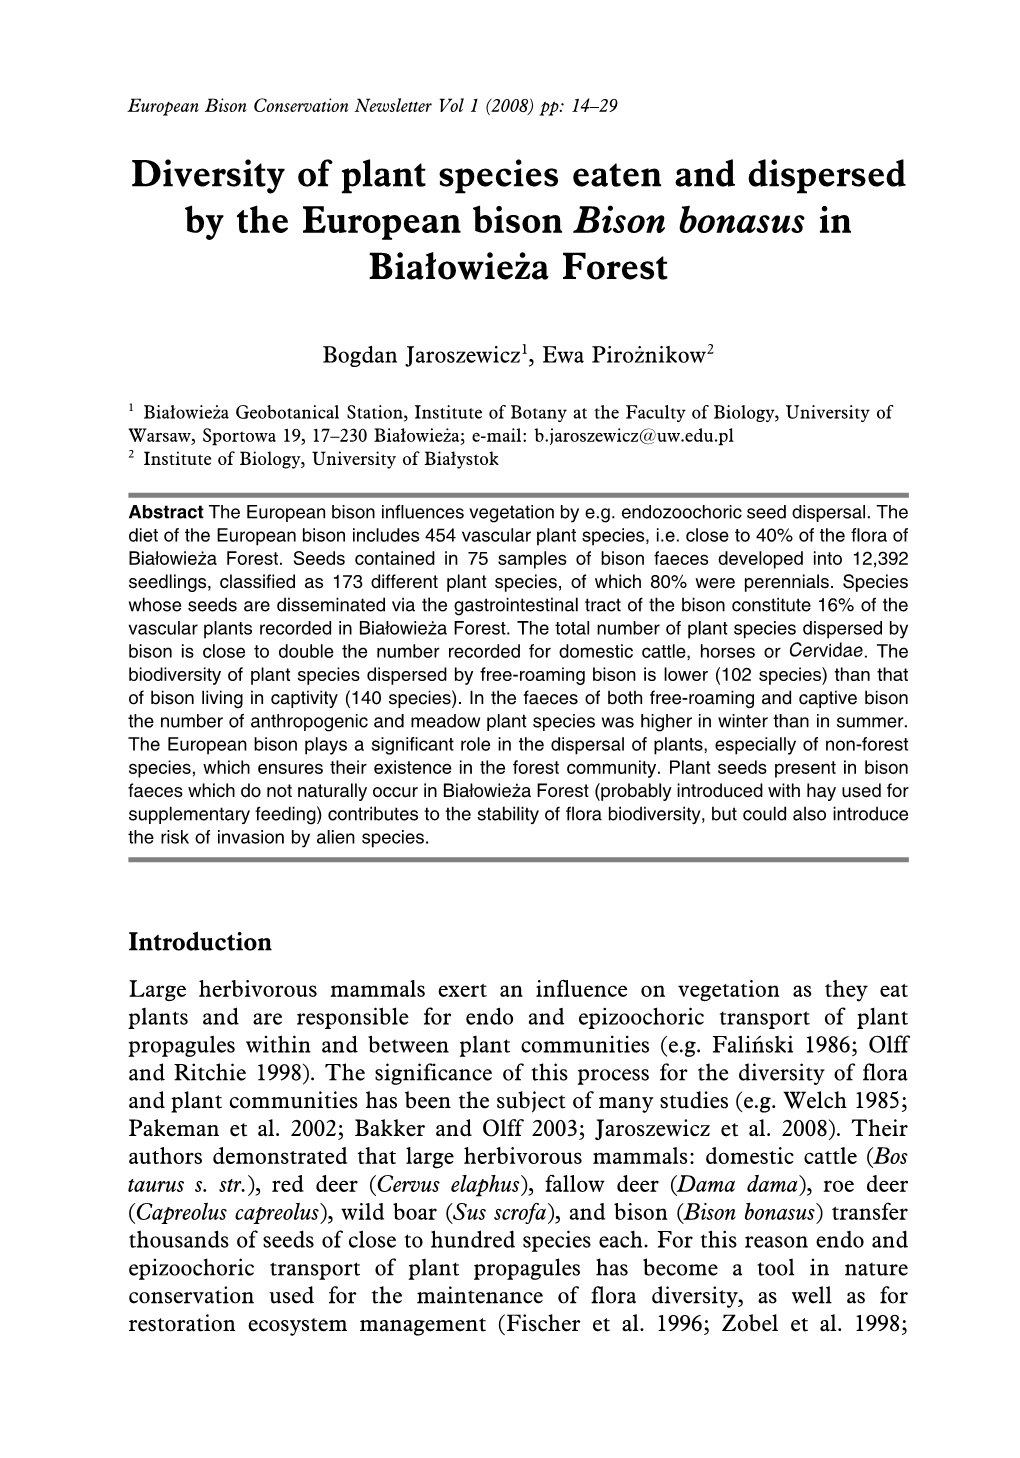 Diversity of Plant Species Eaten and Dispersed by the European Bison Bison Bonasus in Białowieża Forest